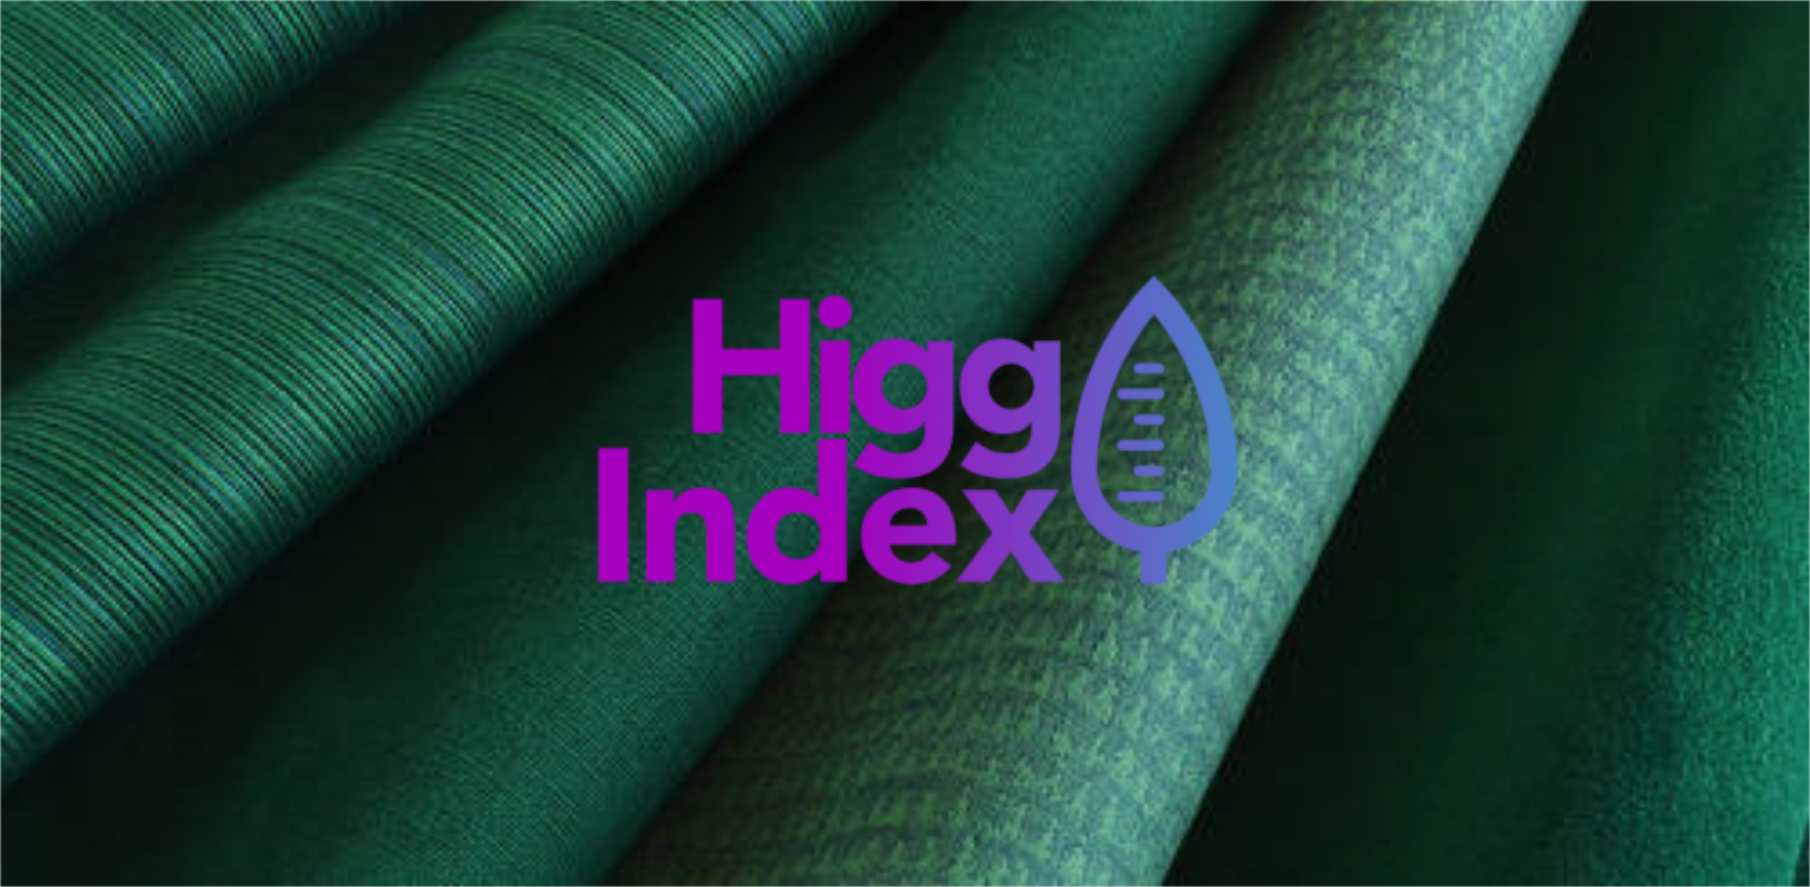 Sustainable-Apparel-Coalition-Higg-Index-Buckhill-Capital